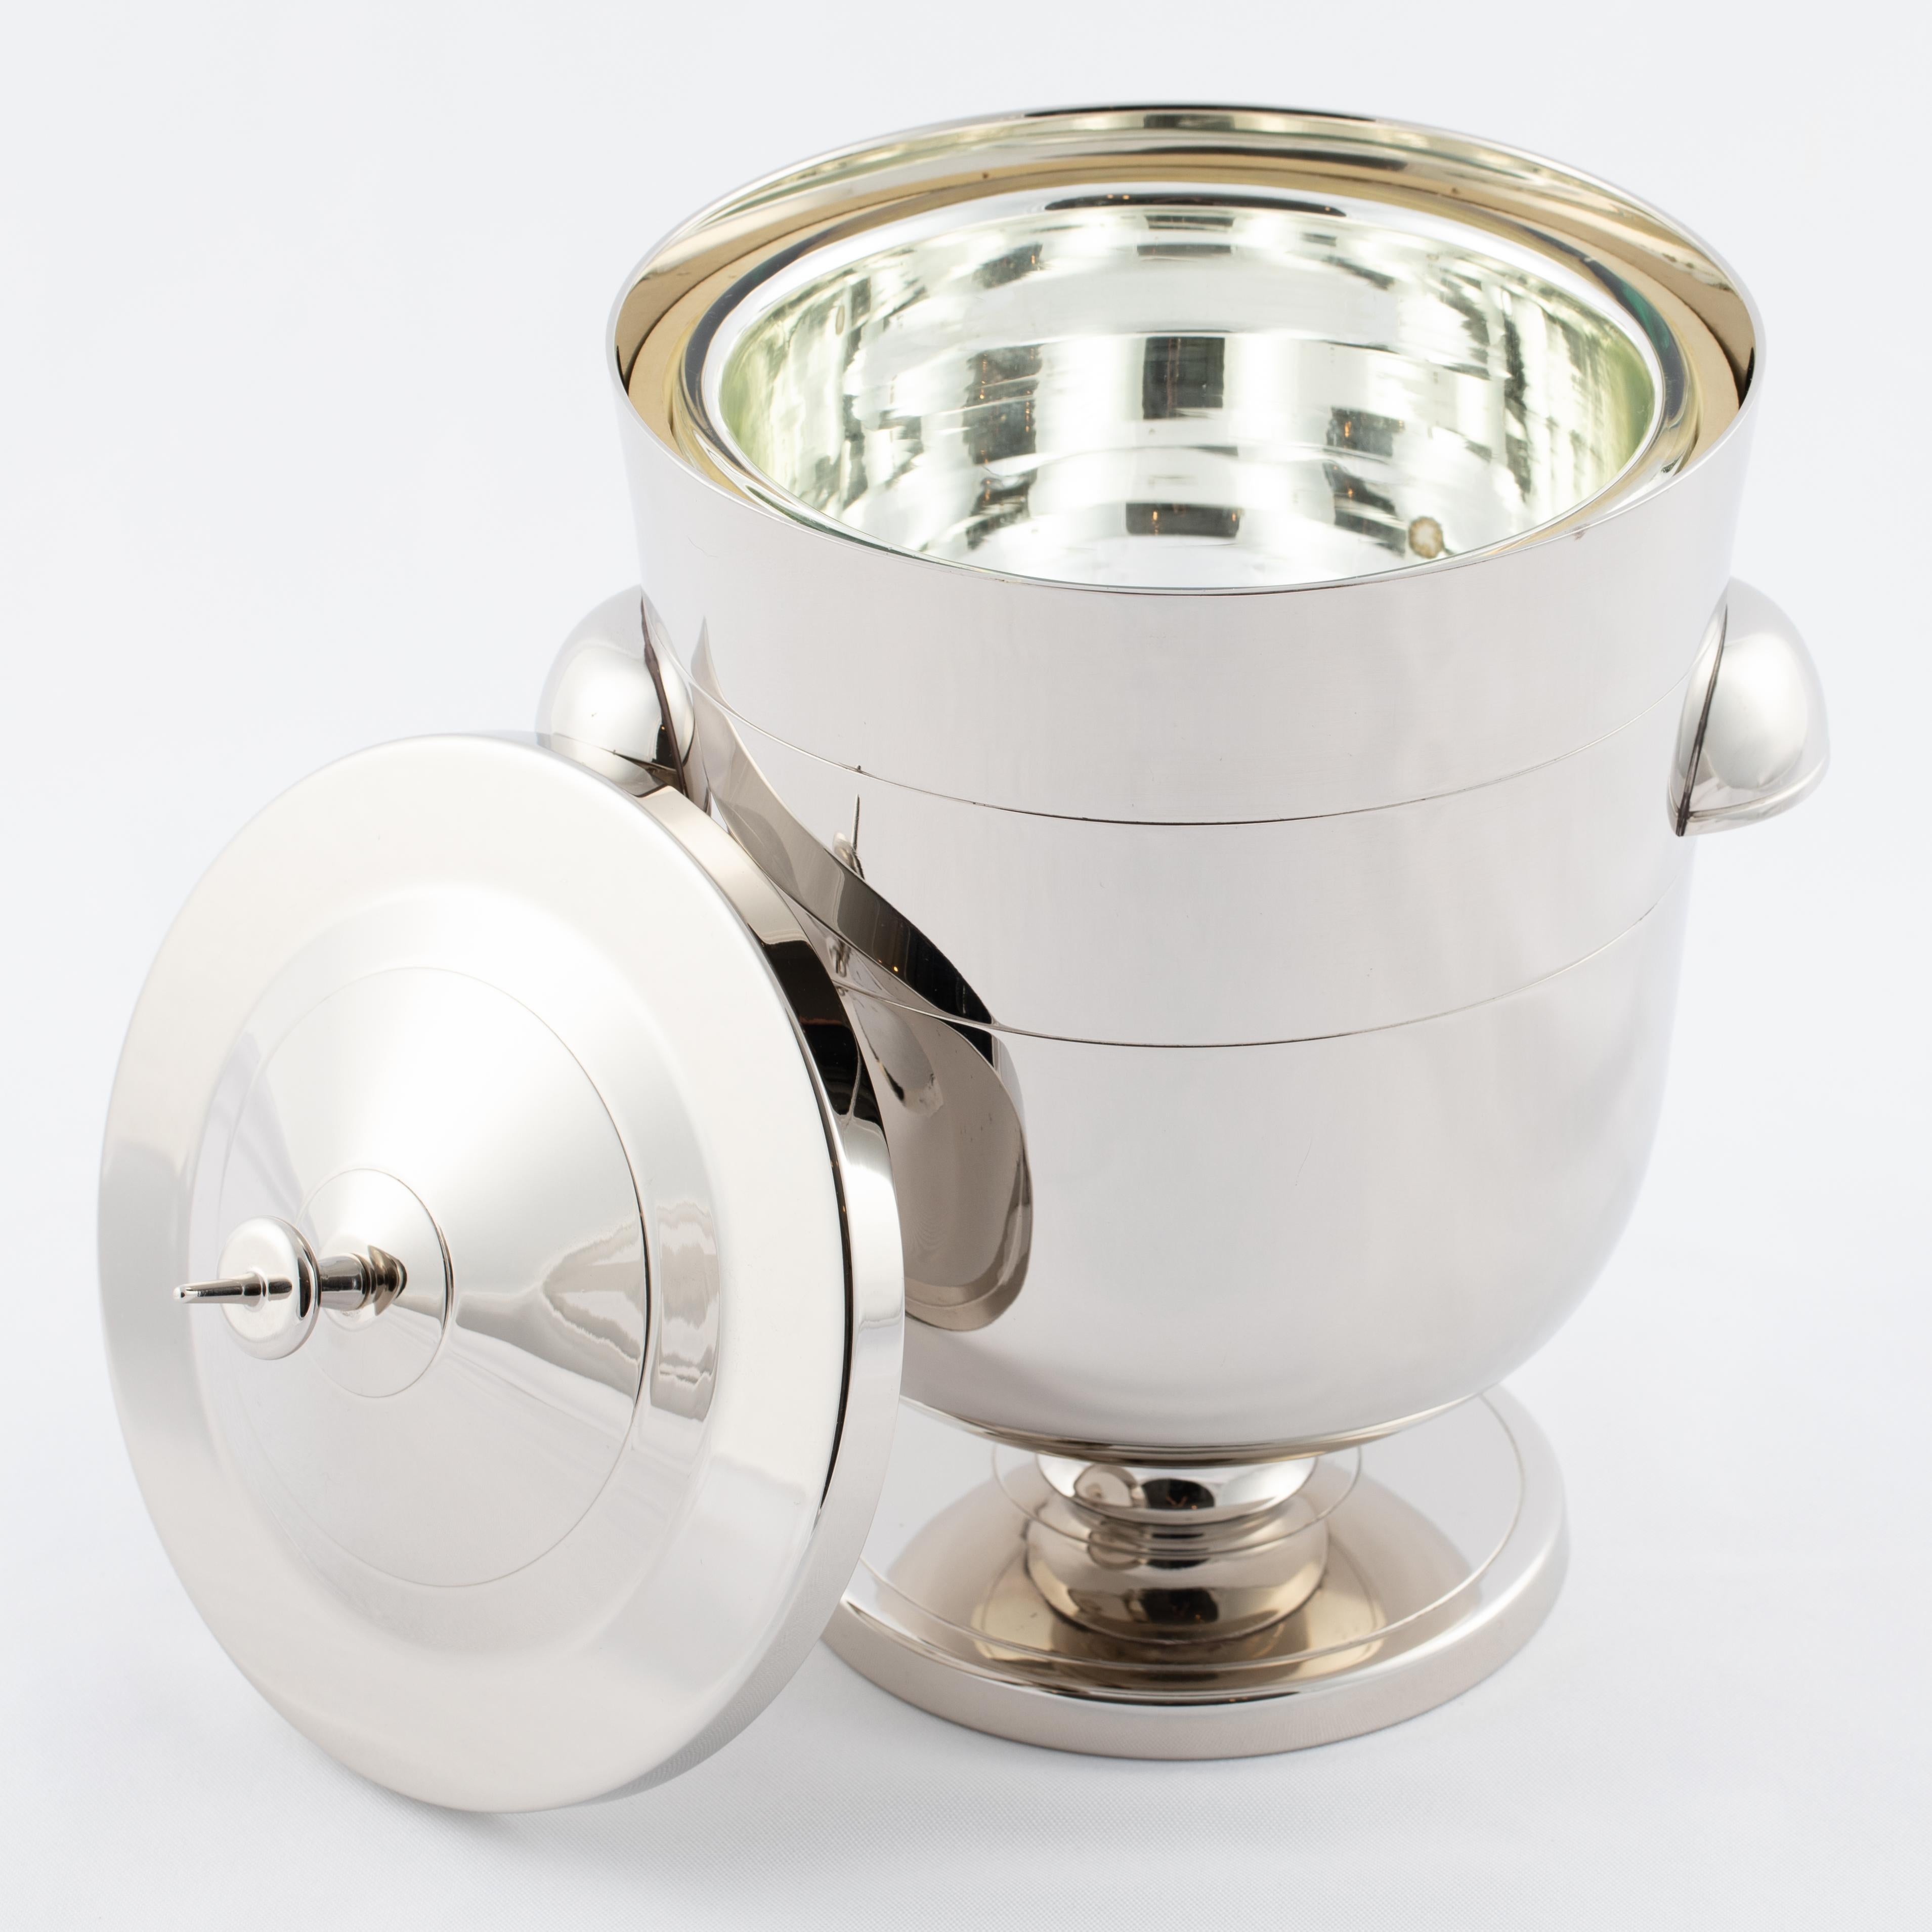 Lovely midcentury ice bucket with incised ring designs by Tommi Parzinger for Dorlyn-Silversmiths. Newly re-plated in polished nickel. Retains original mercury-glass insulated insert. Maker's stamp on underside. 




